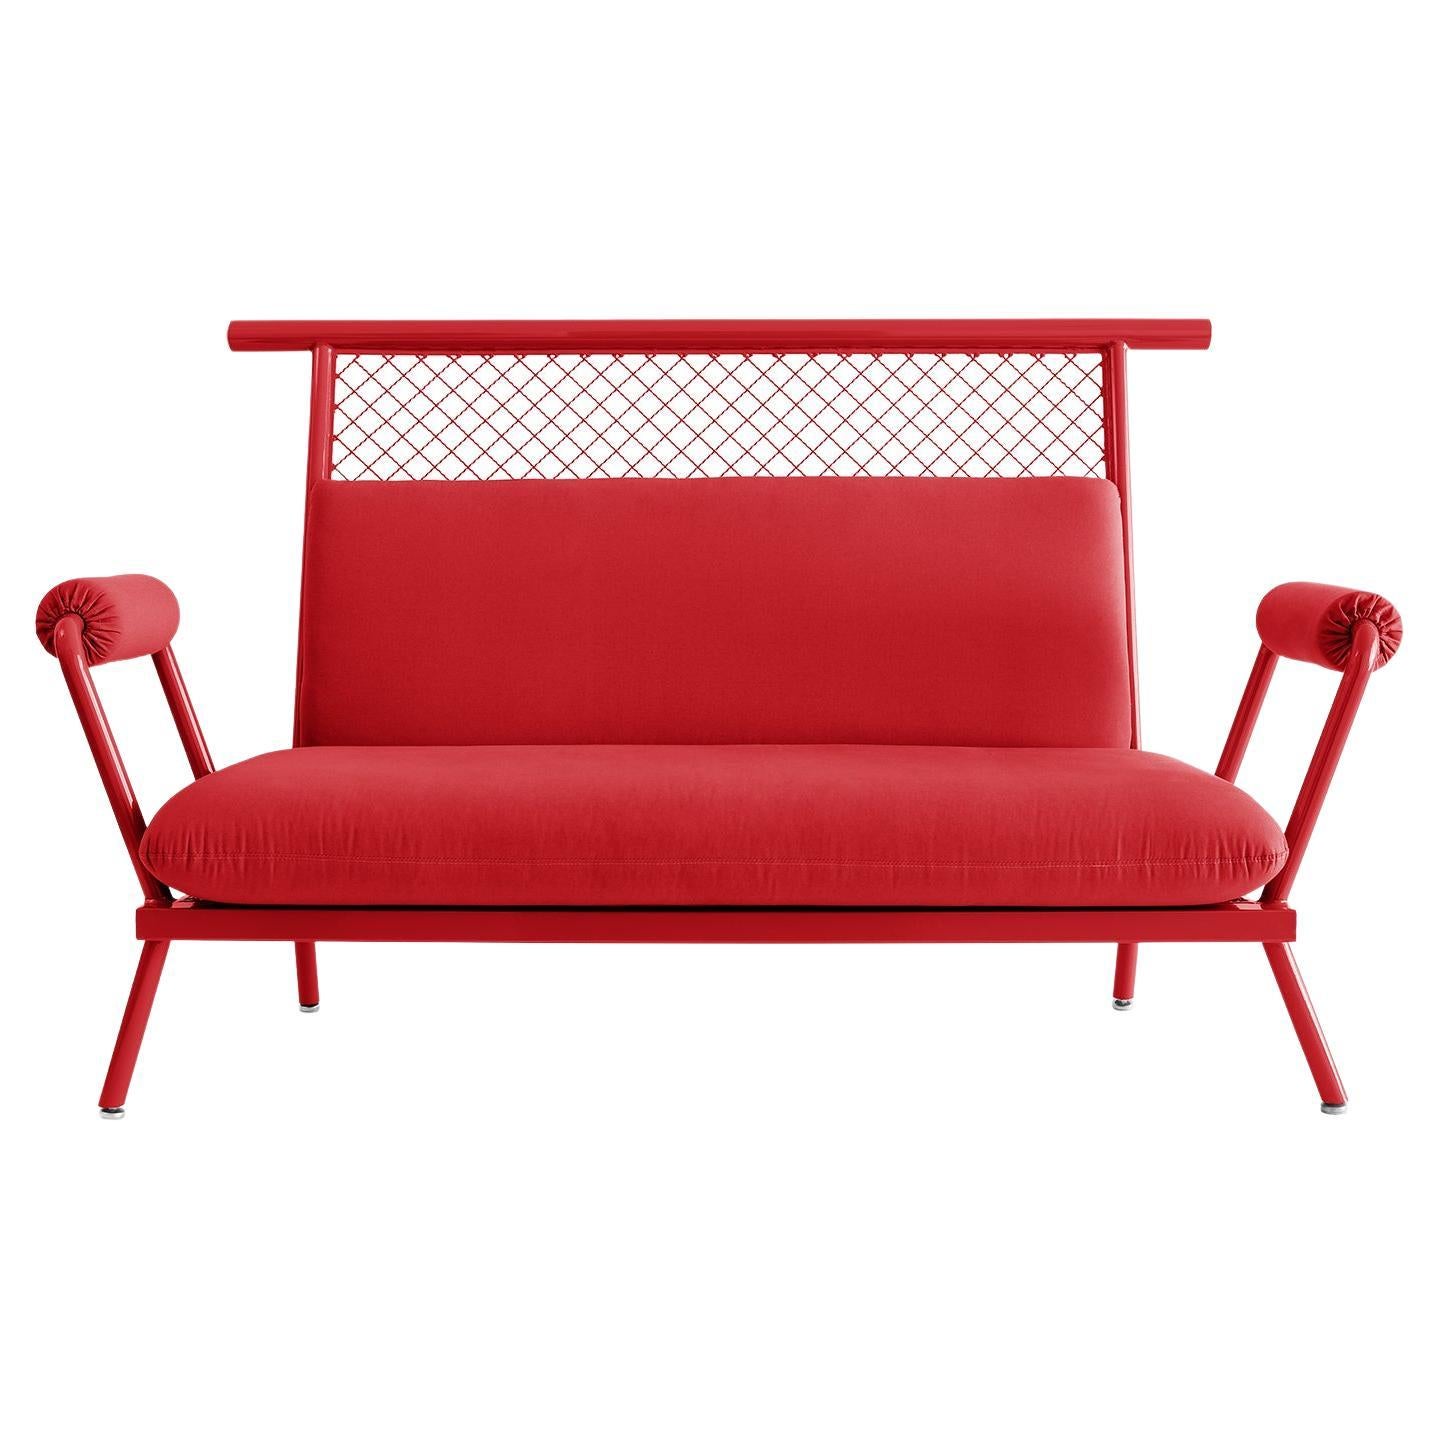 Handmade Red PK7 Sofa, Carbon Steel Structure and Metal Mesh by Paulo Kobylka